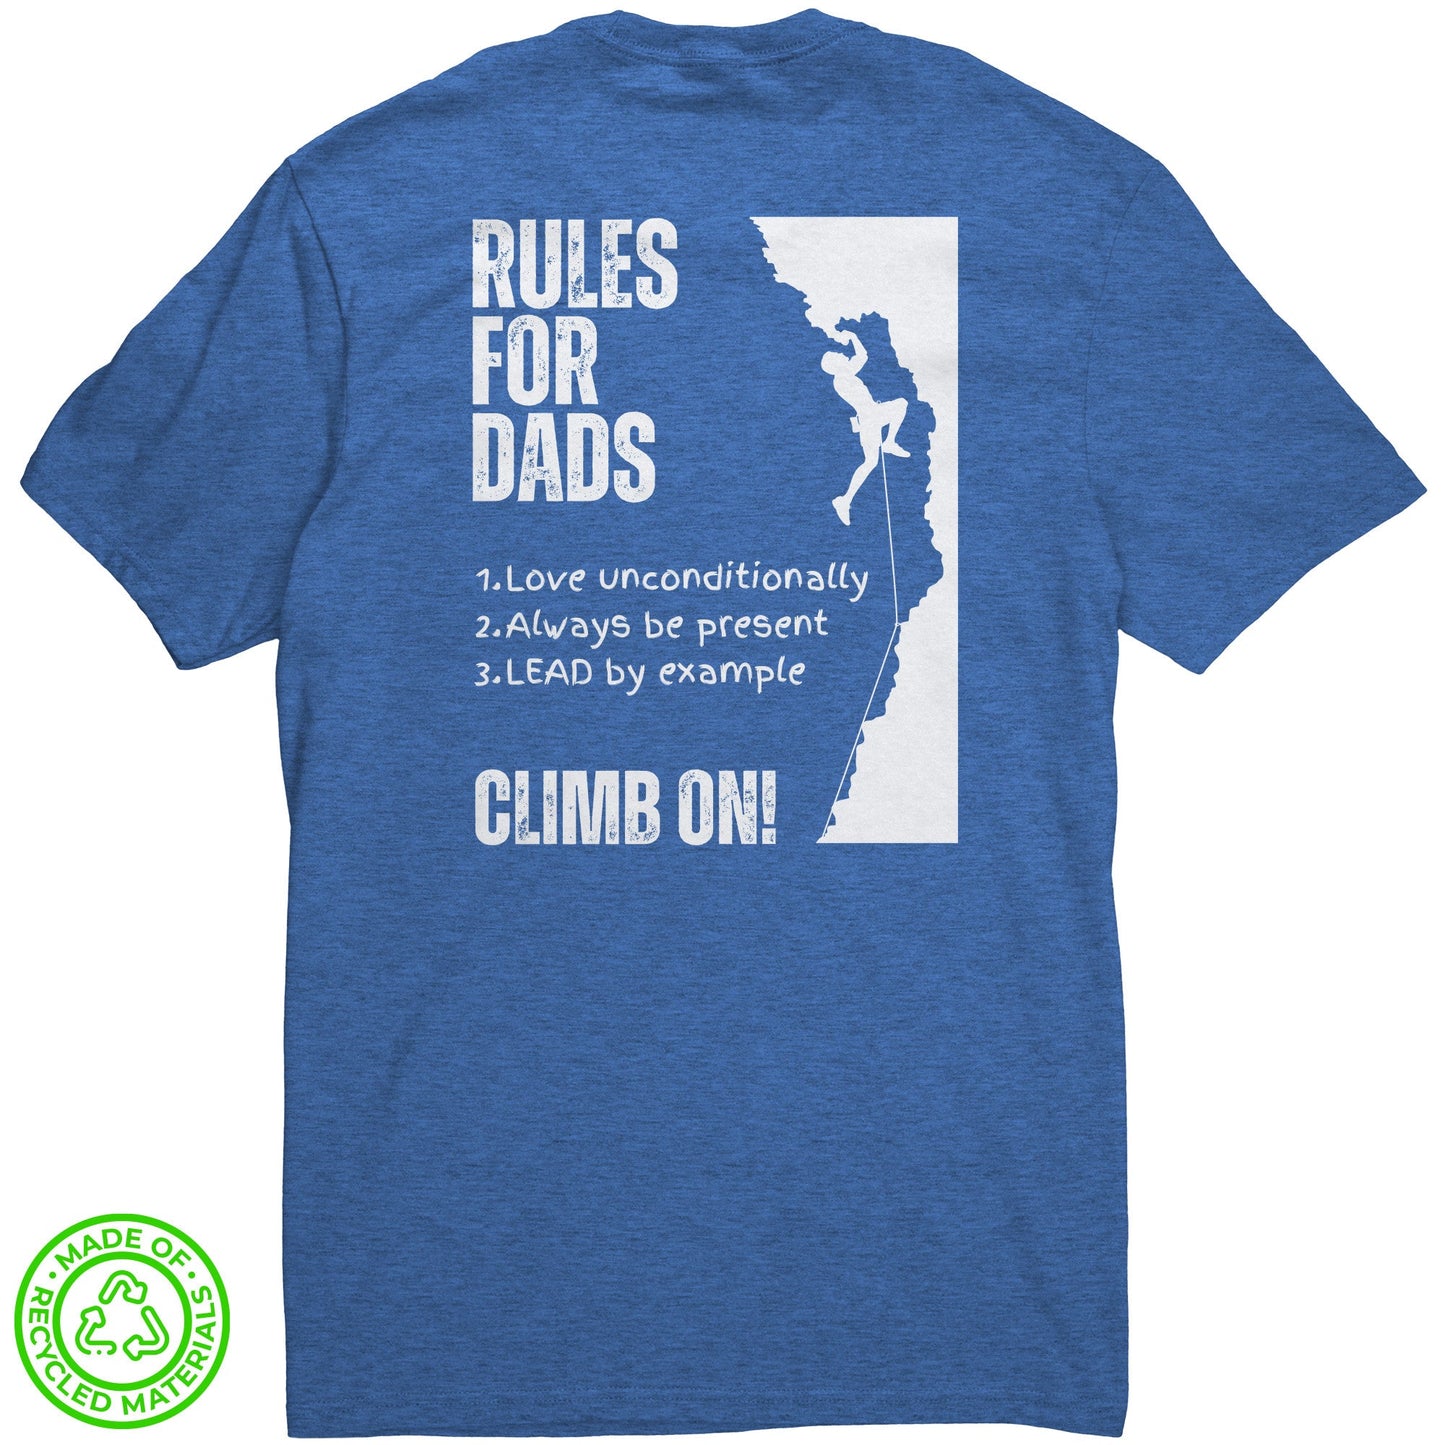 Eco-friendly Re-Tee (Rules for Dads)